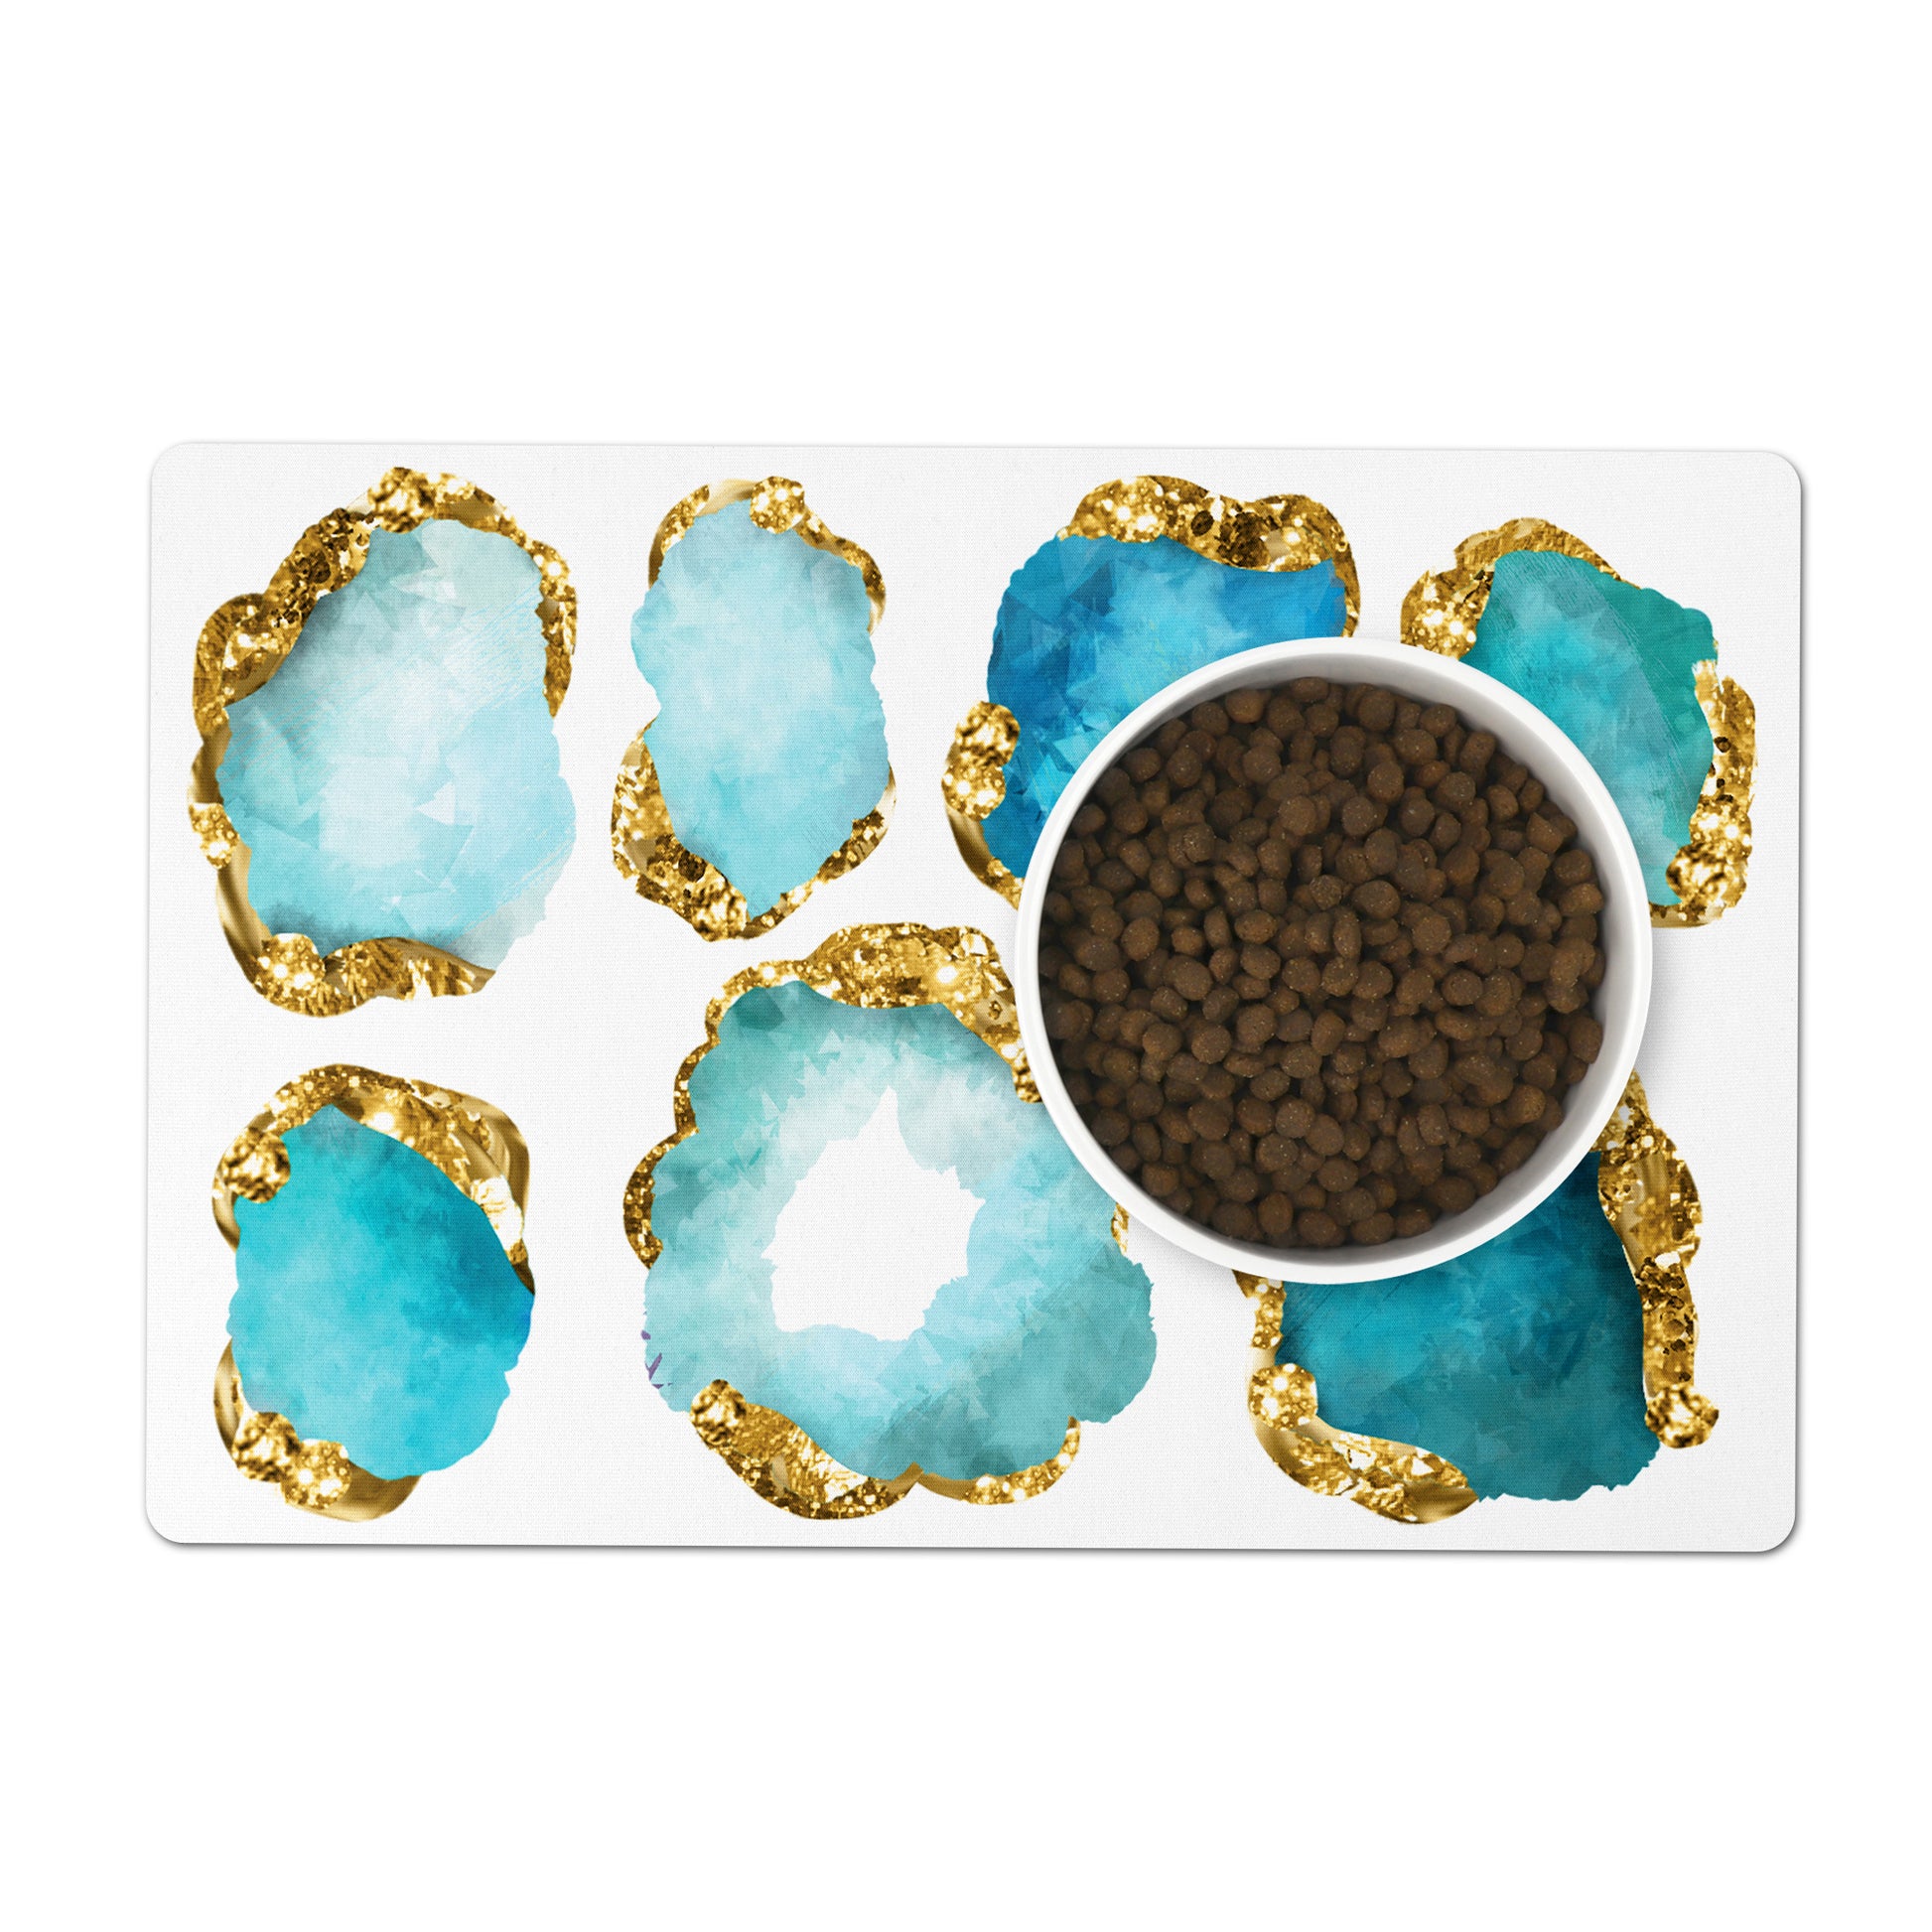 Aquamarine and gold  gemstone pet feeding mat. Glamorous pet supplies for your dog or cat